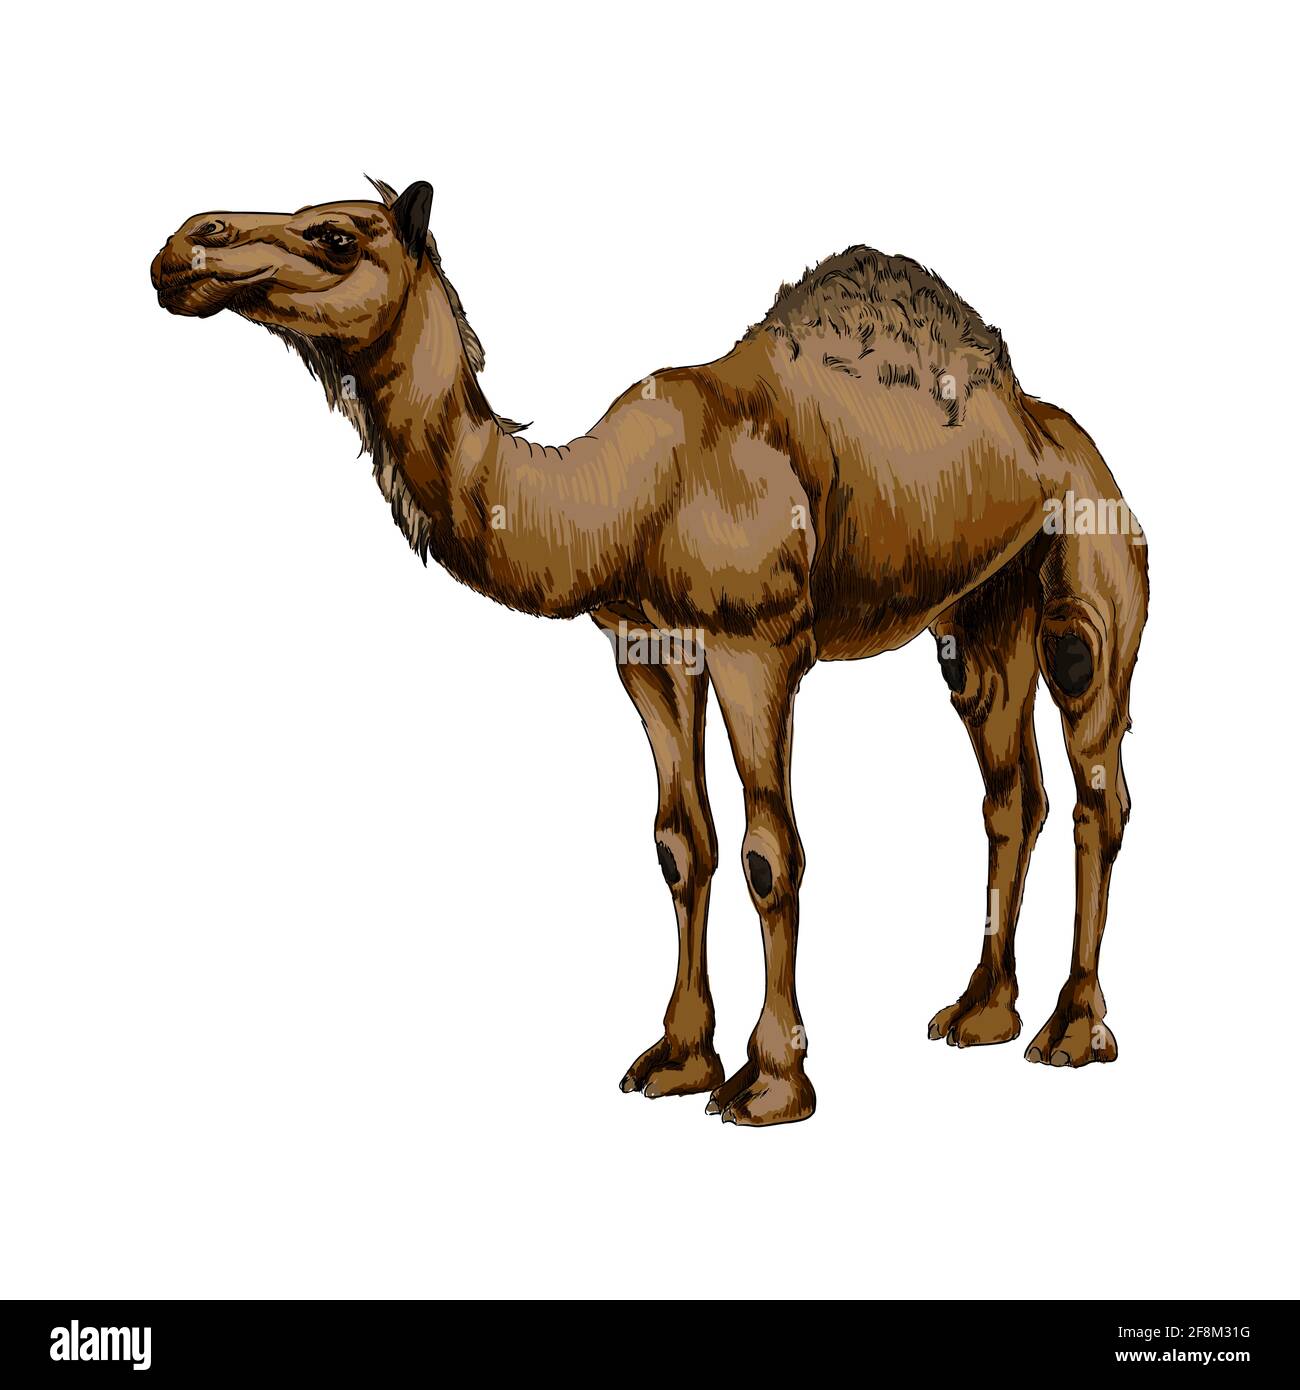 Camel drawing Cut Out Stock Images & Pictures - Alamy